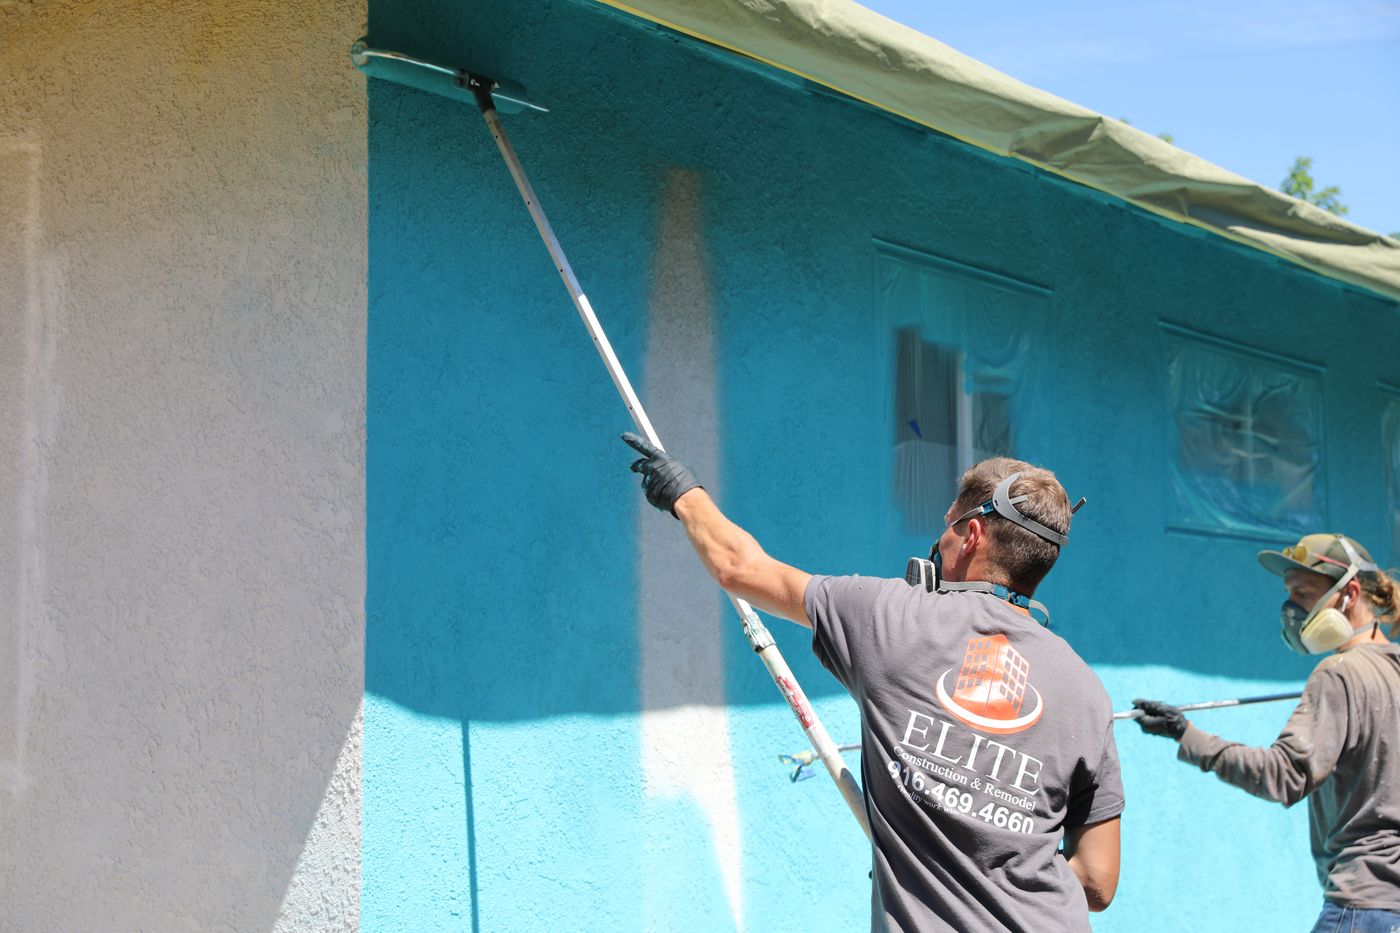 exterior house painting